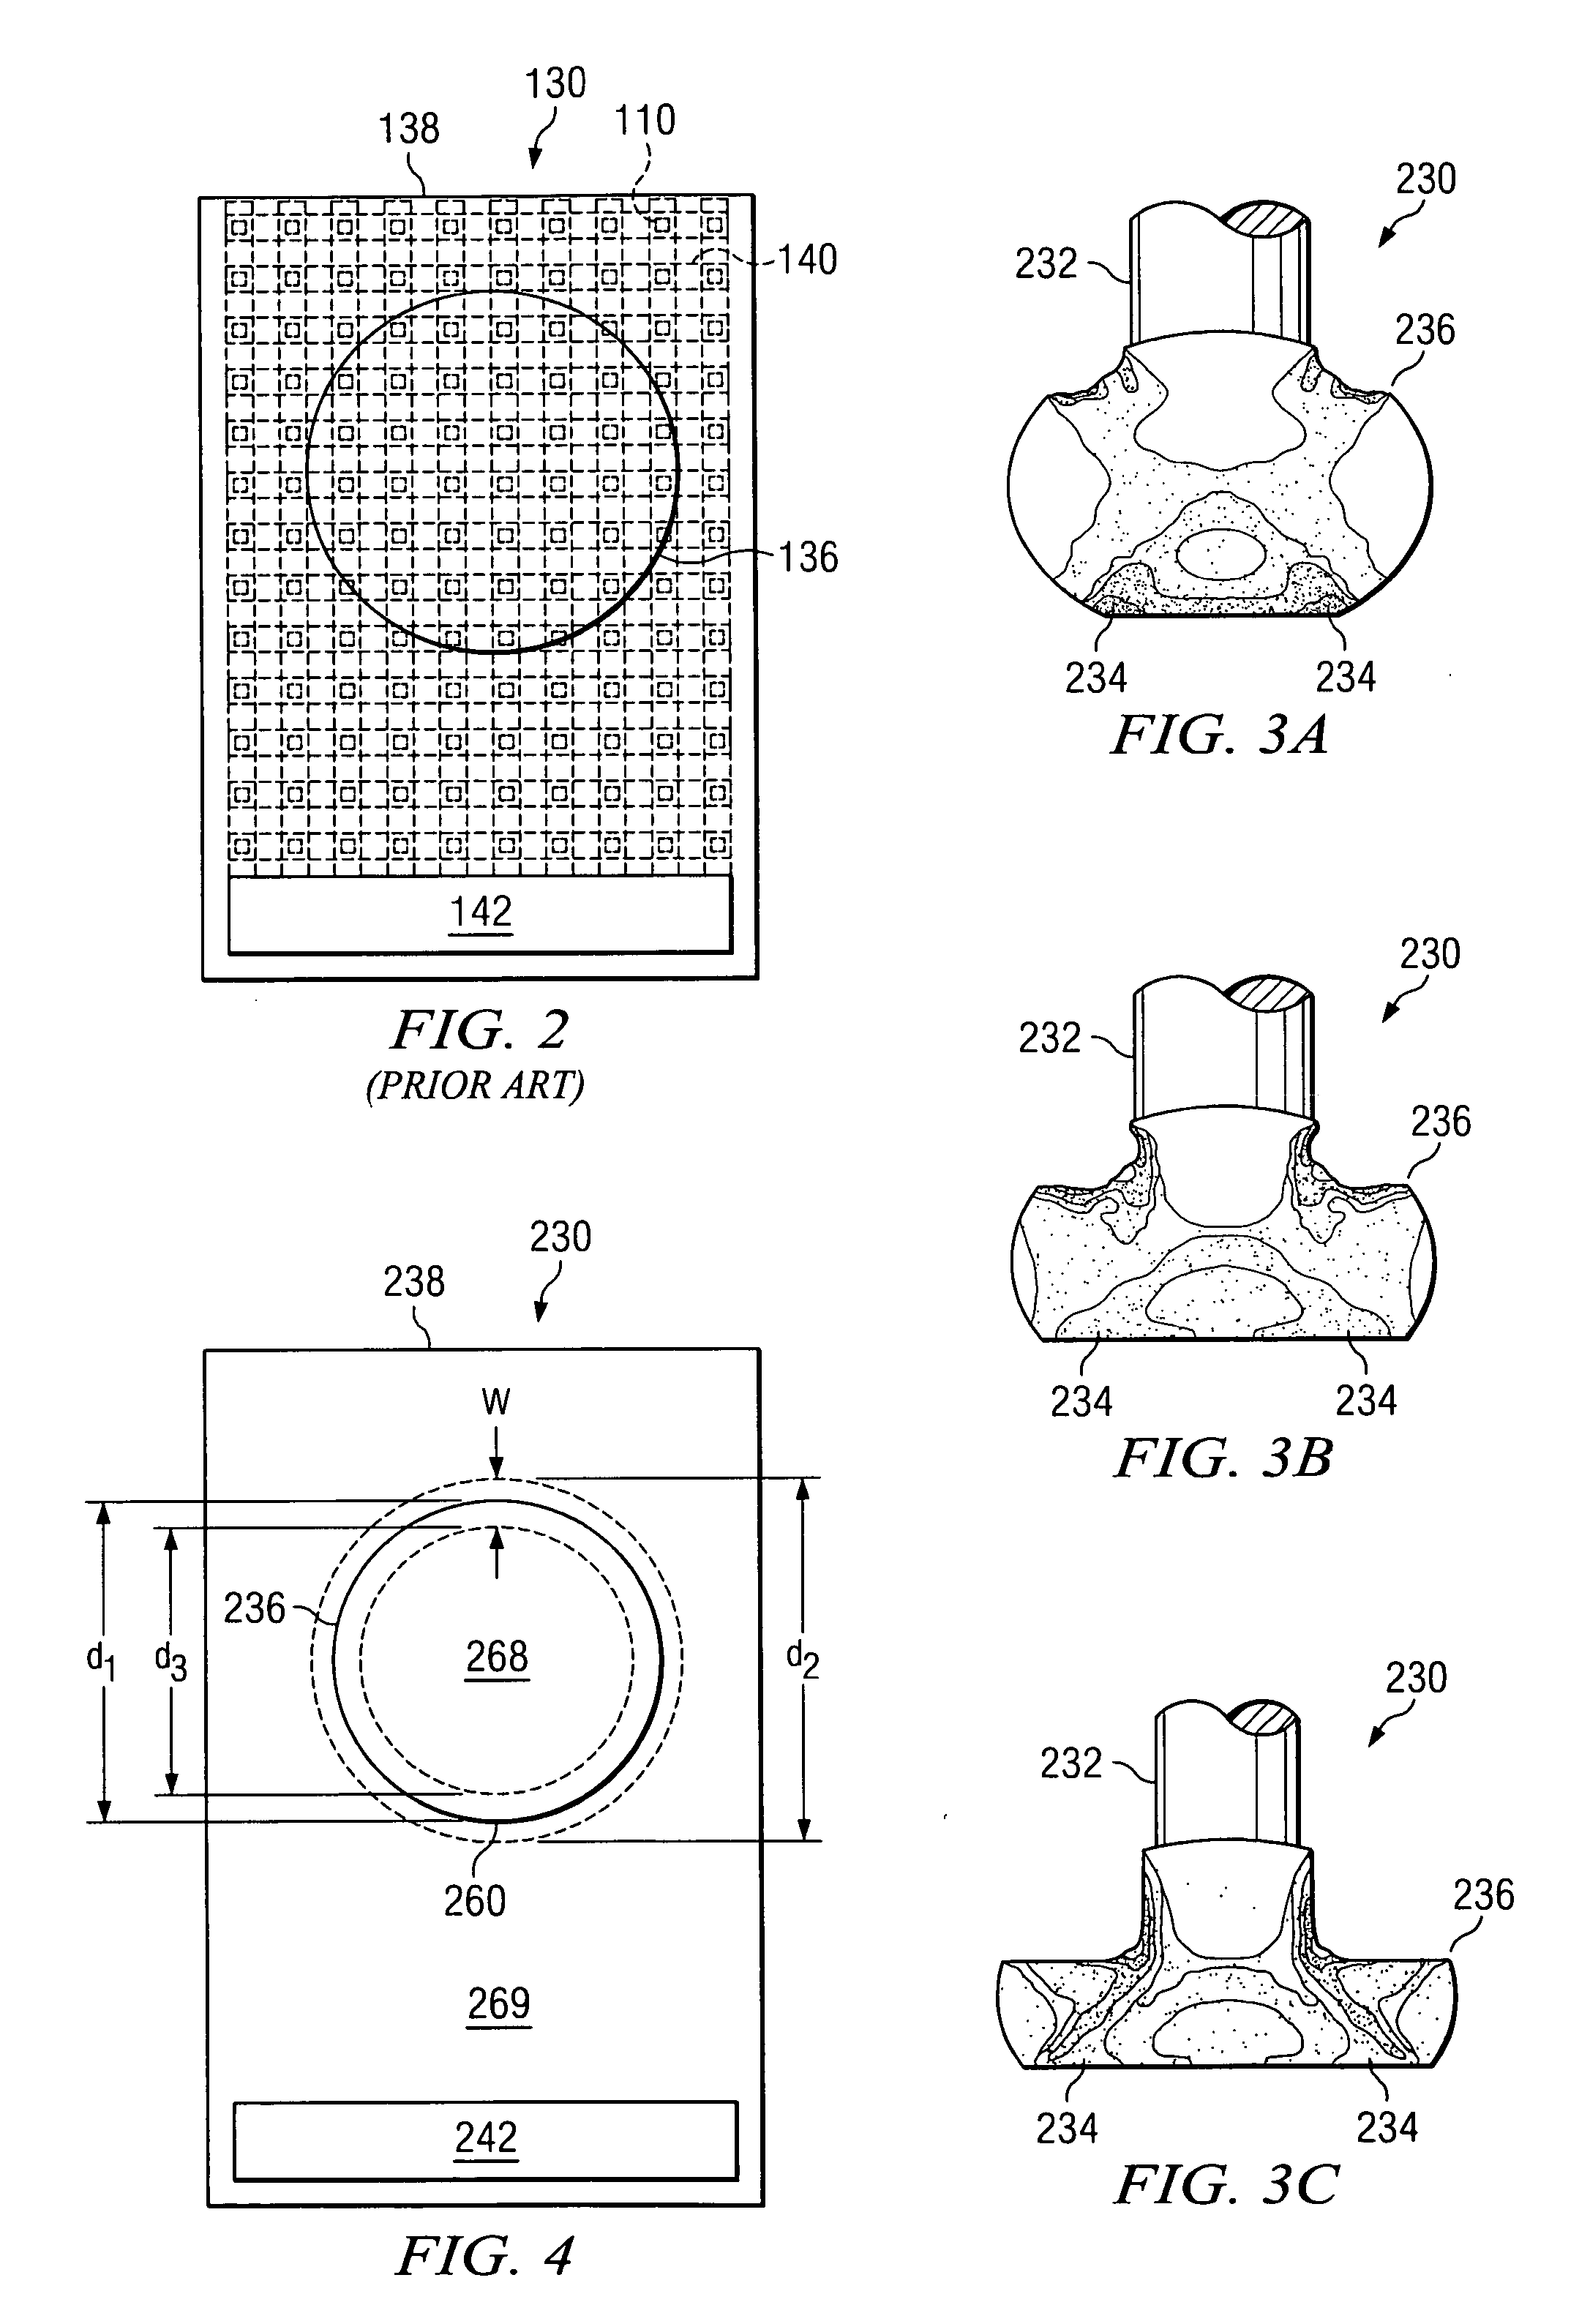 Support structures for semiconductor devices